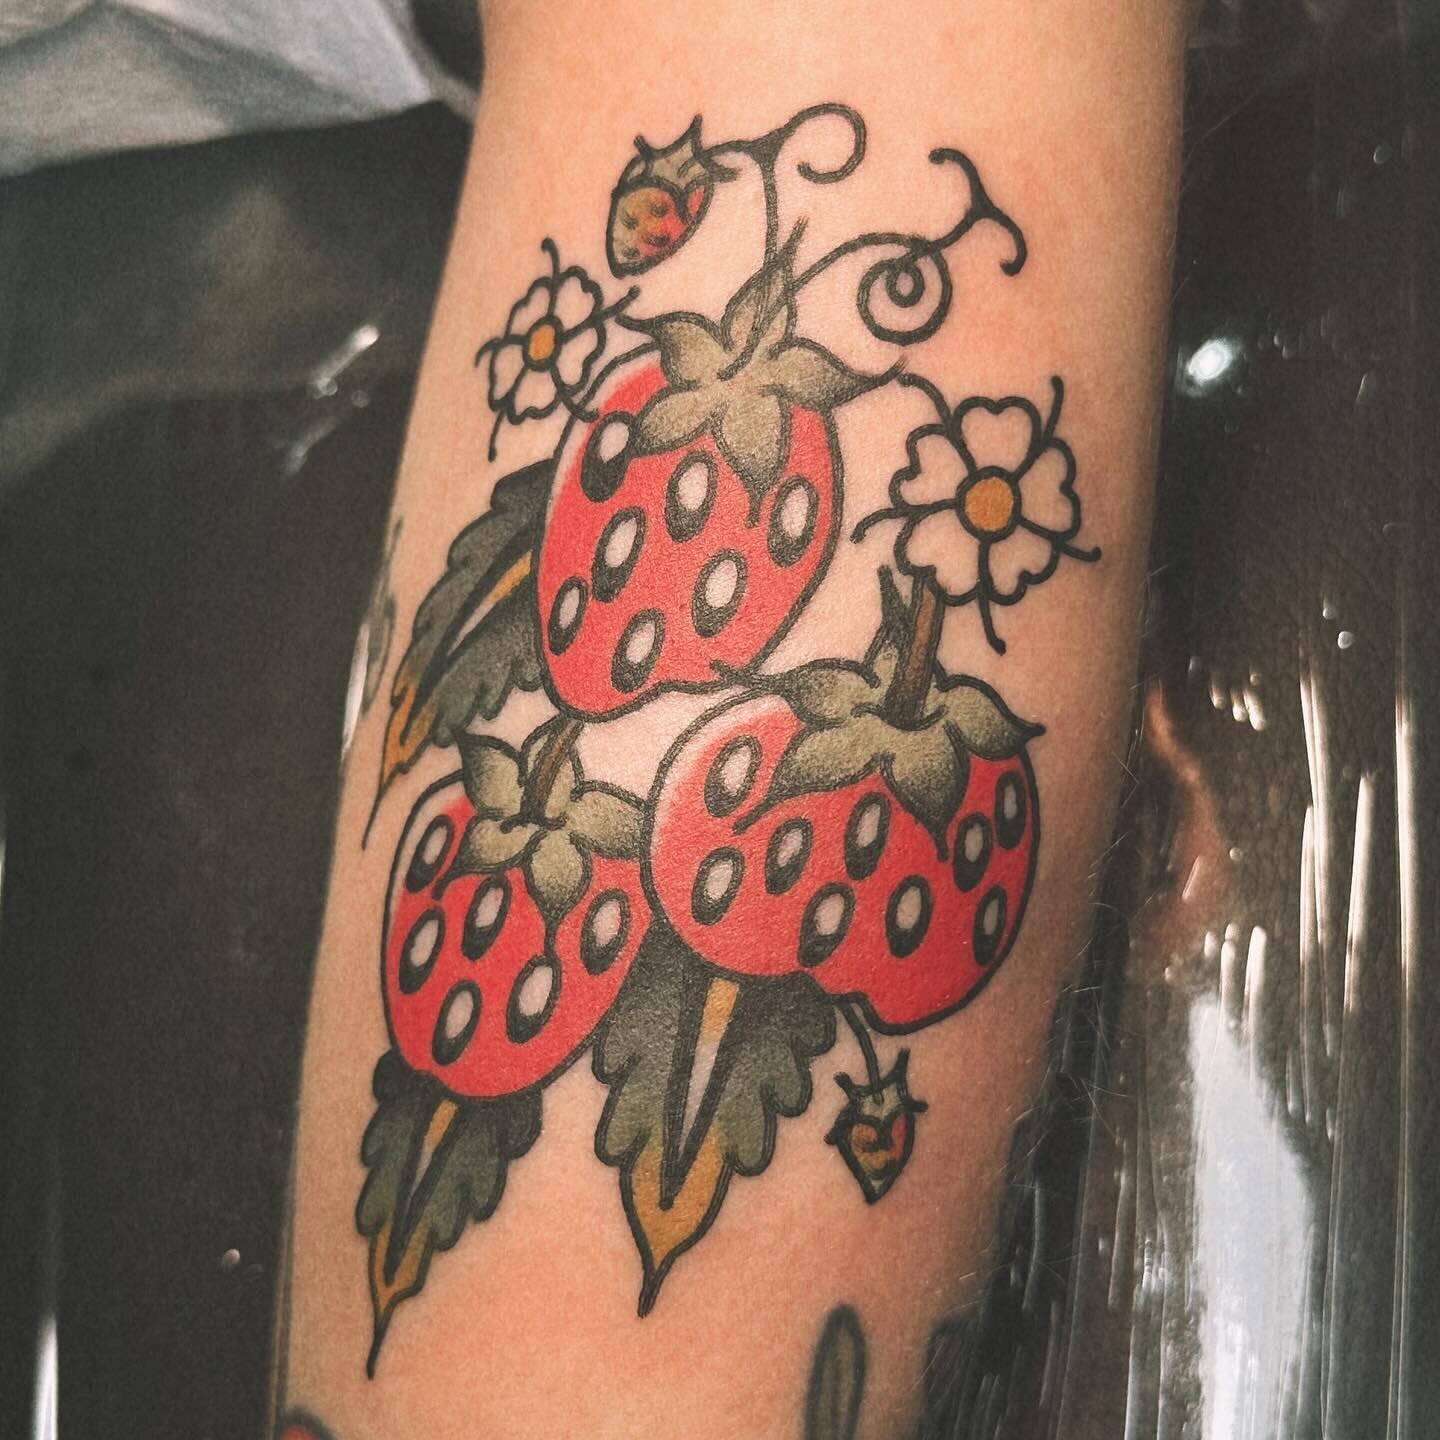 lil cuties for Shelby 🍓

#tiffytuffington #balmtattooing #grandrapidstattoo